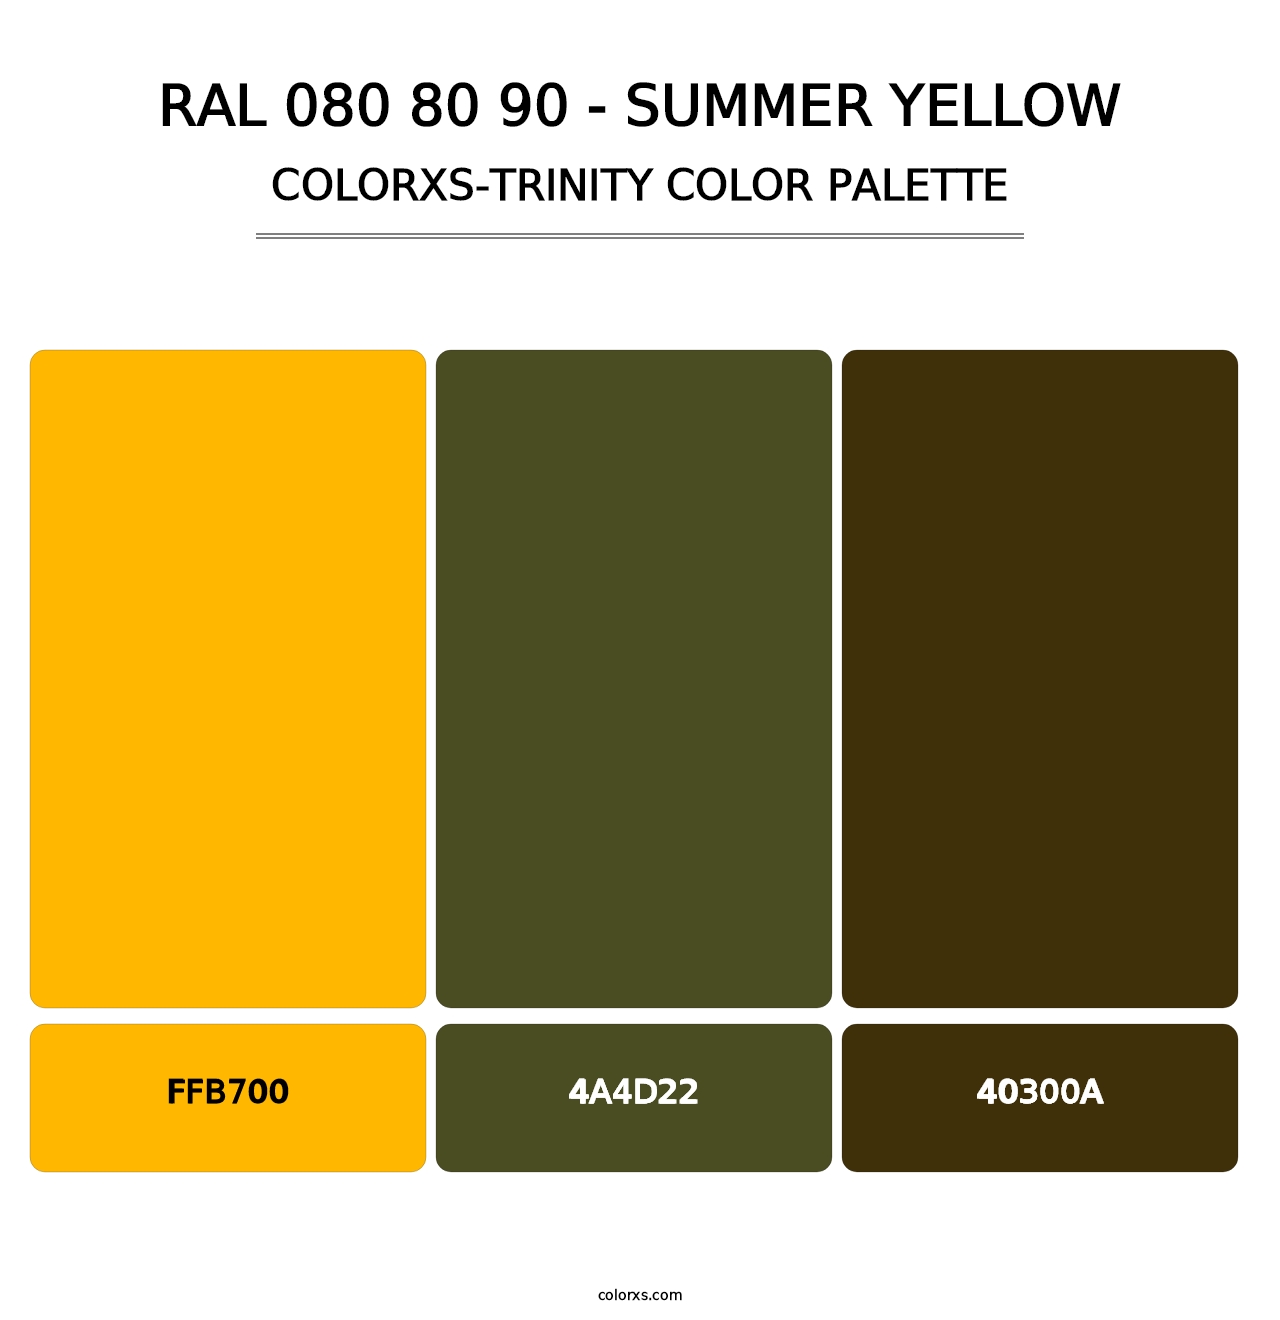 RAL 080 80 90 - Summer Yellow - Colorxs Trinity Palette